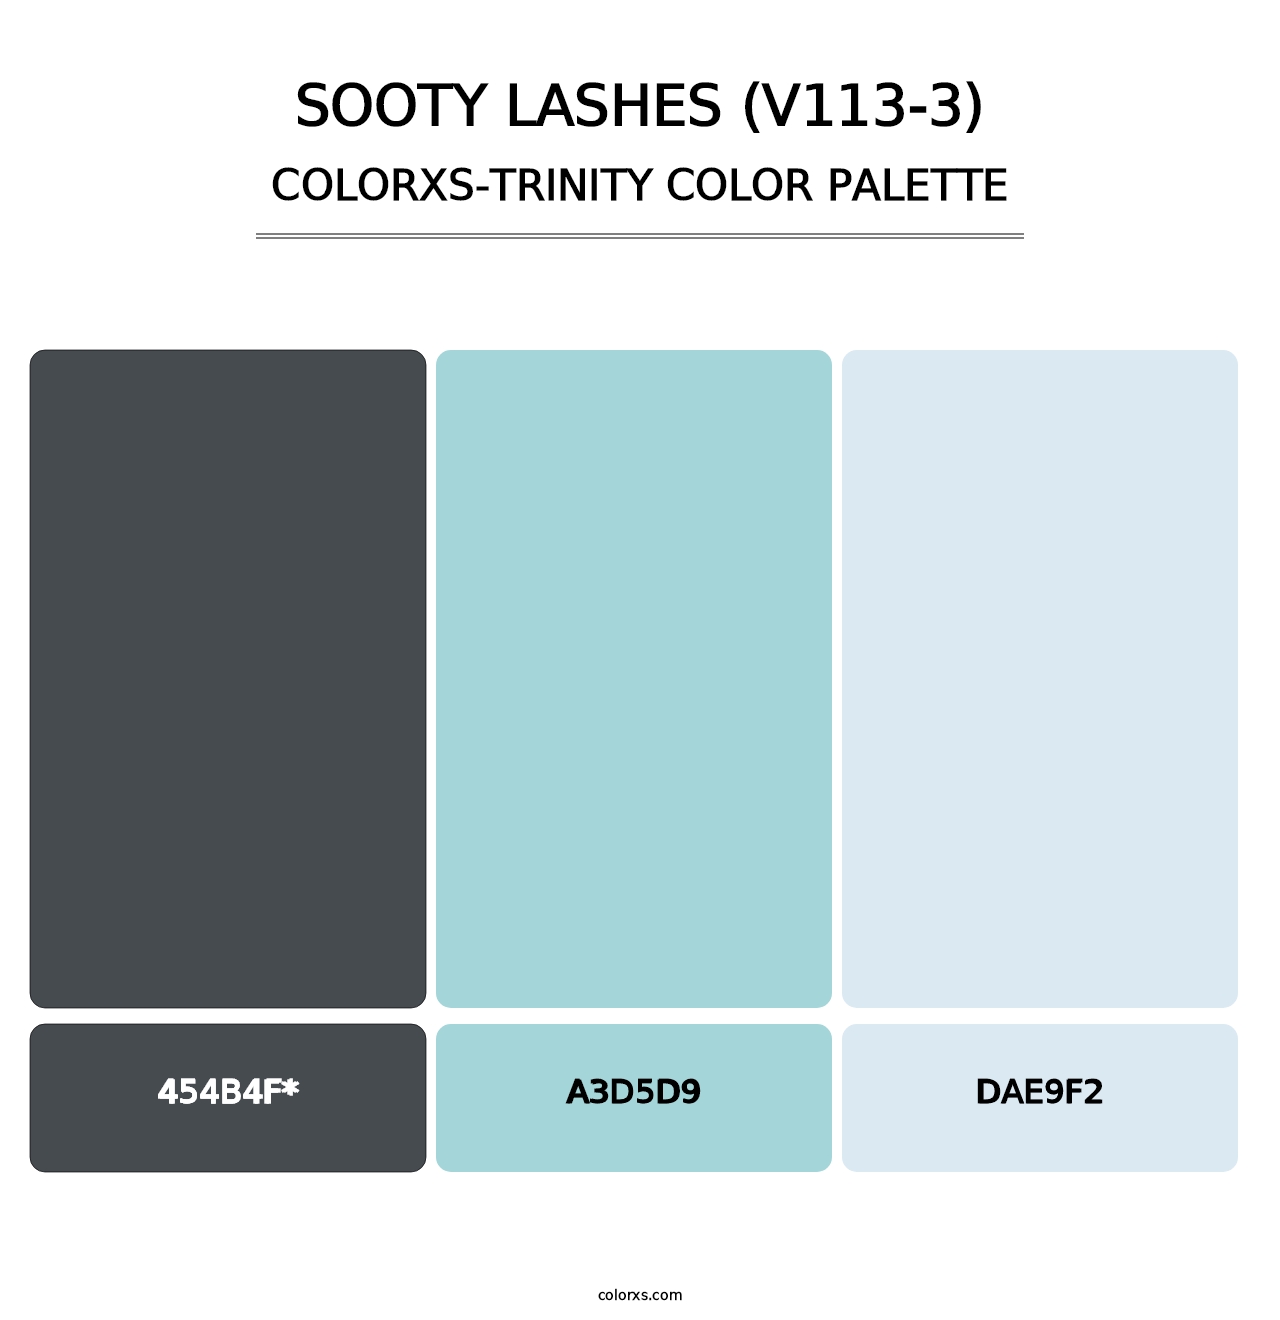 Sooty Lashes (V113-3) - Colorxs Trinity Palette